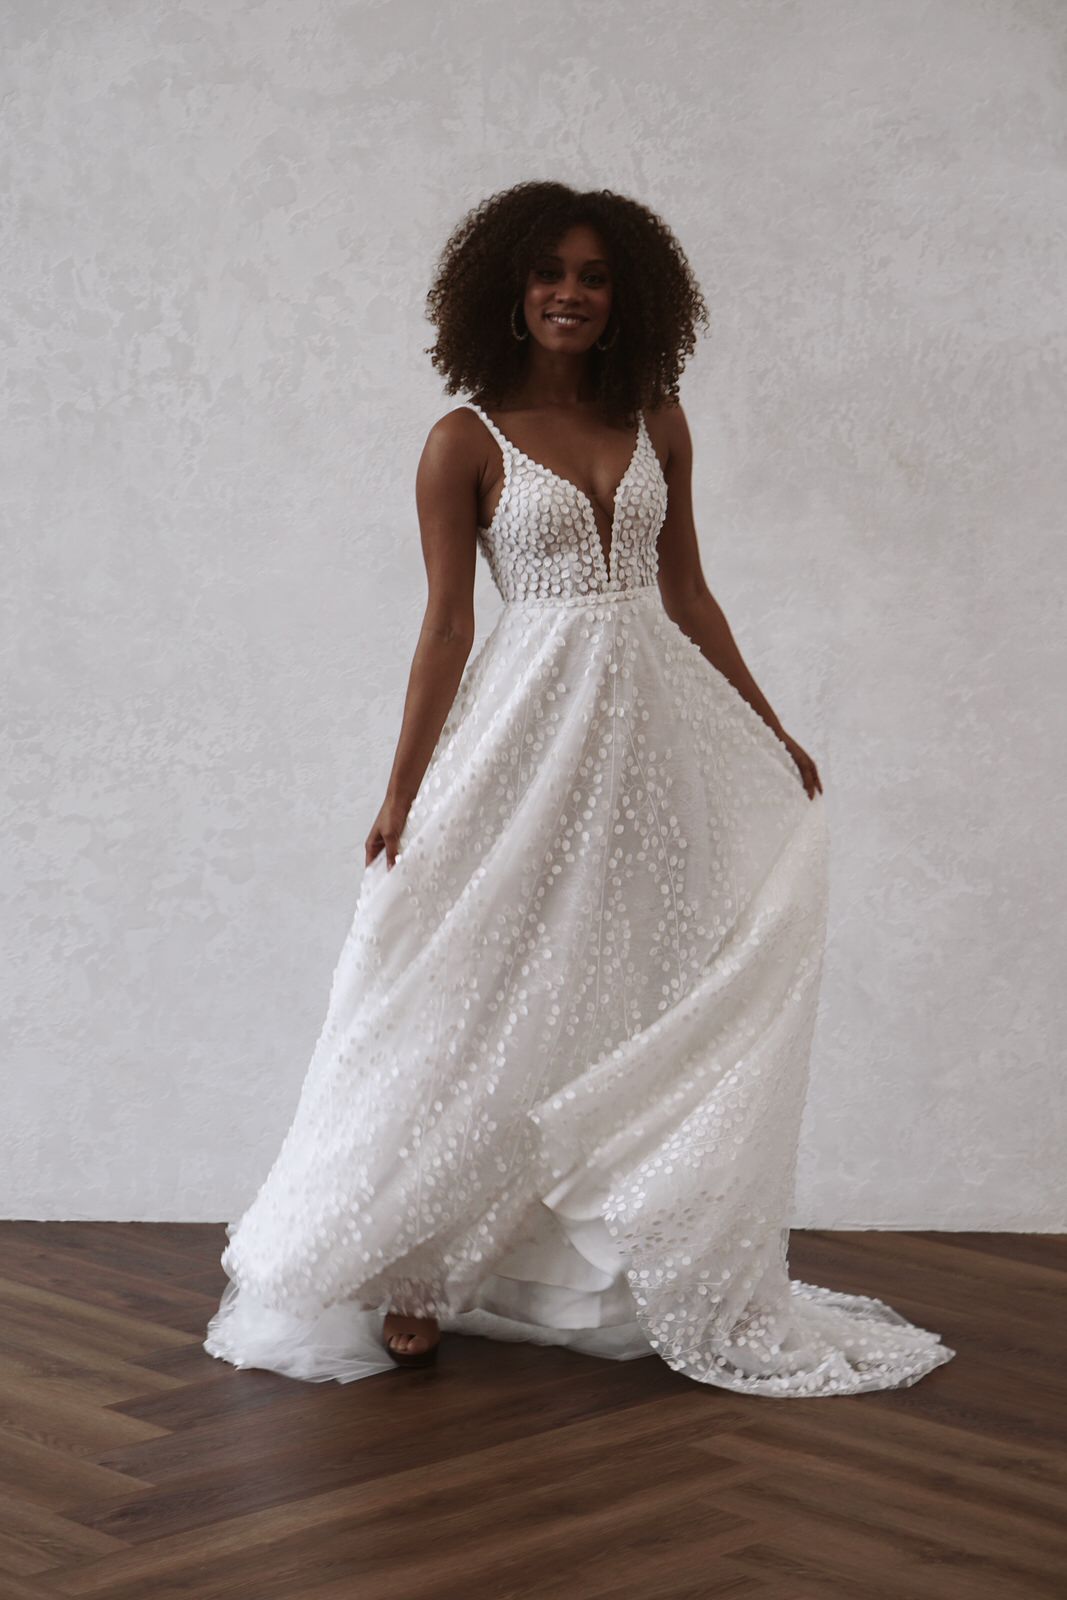 HUXLEY FLOWY : Made With Love, Unique Bridal